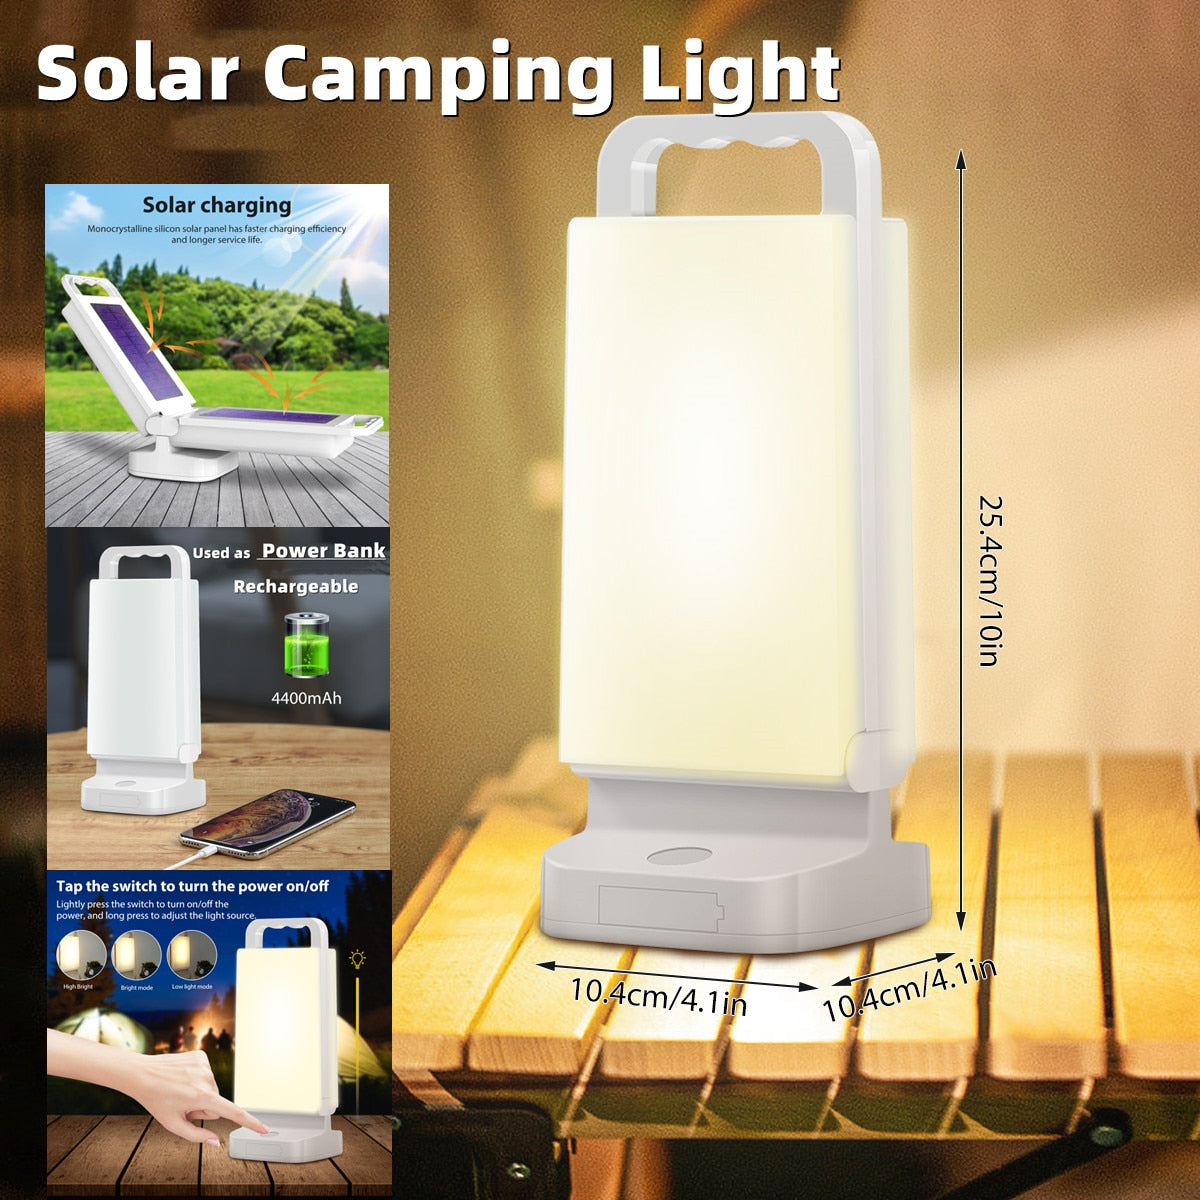 Solar LED Light Outdoor Camping Light Rechargeable Dimmable LED Camping Lantern Portable Emergency Light Solar Light For Hiking - lebenoutdoors